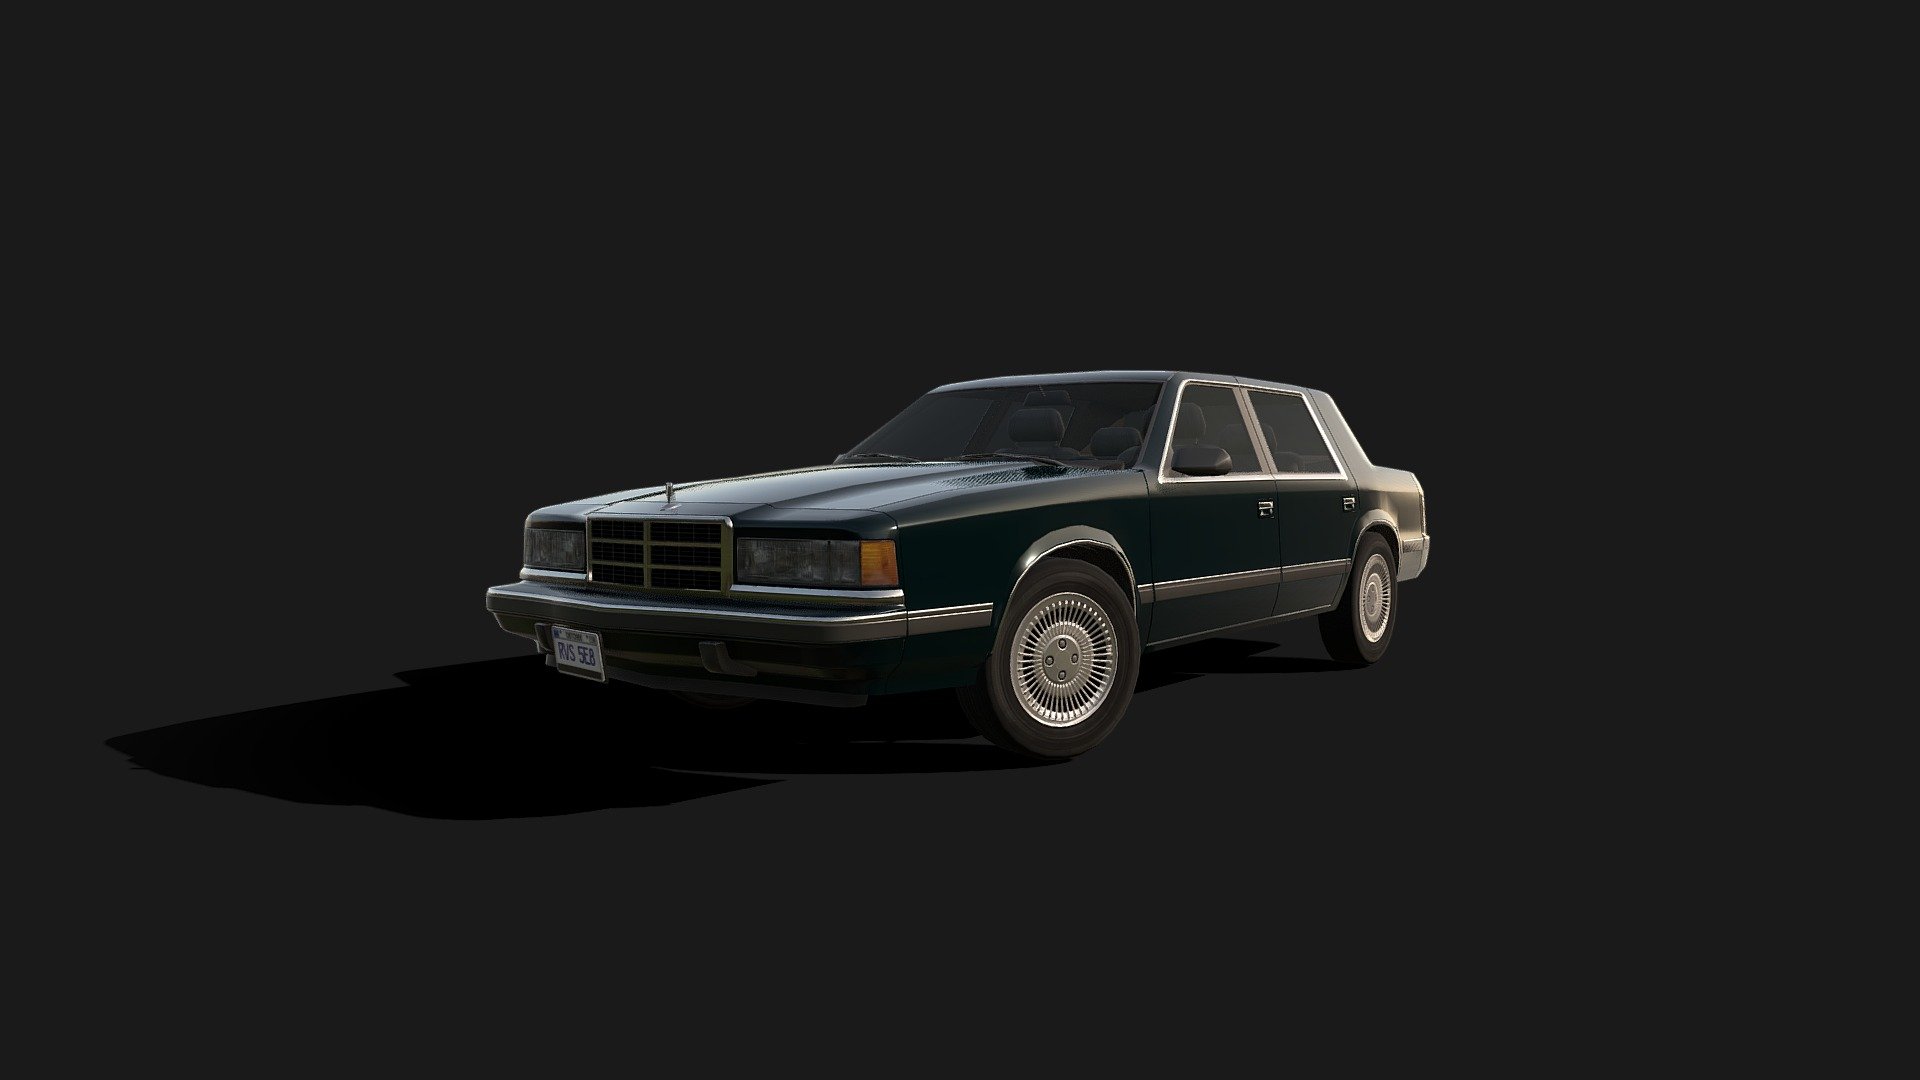 3d model of an American sedan of the 80s. The design is based on Dodge Dynasty ‘88. Use the model as you see fit and have a nice day.
3.12.2021 Uptade: Textured interior, minor defects removed 3d model